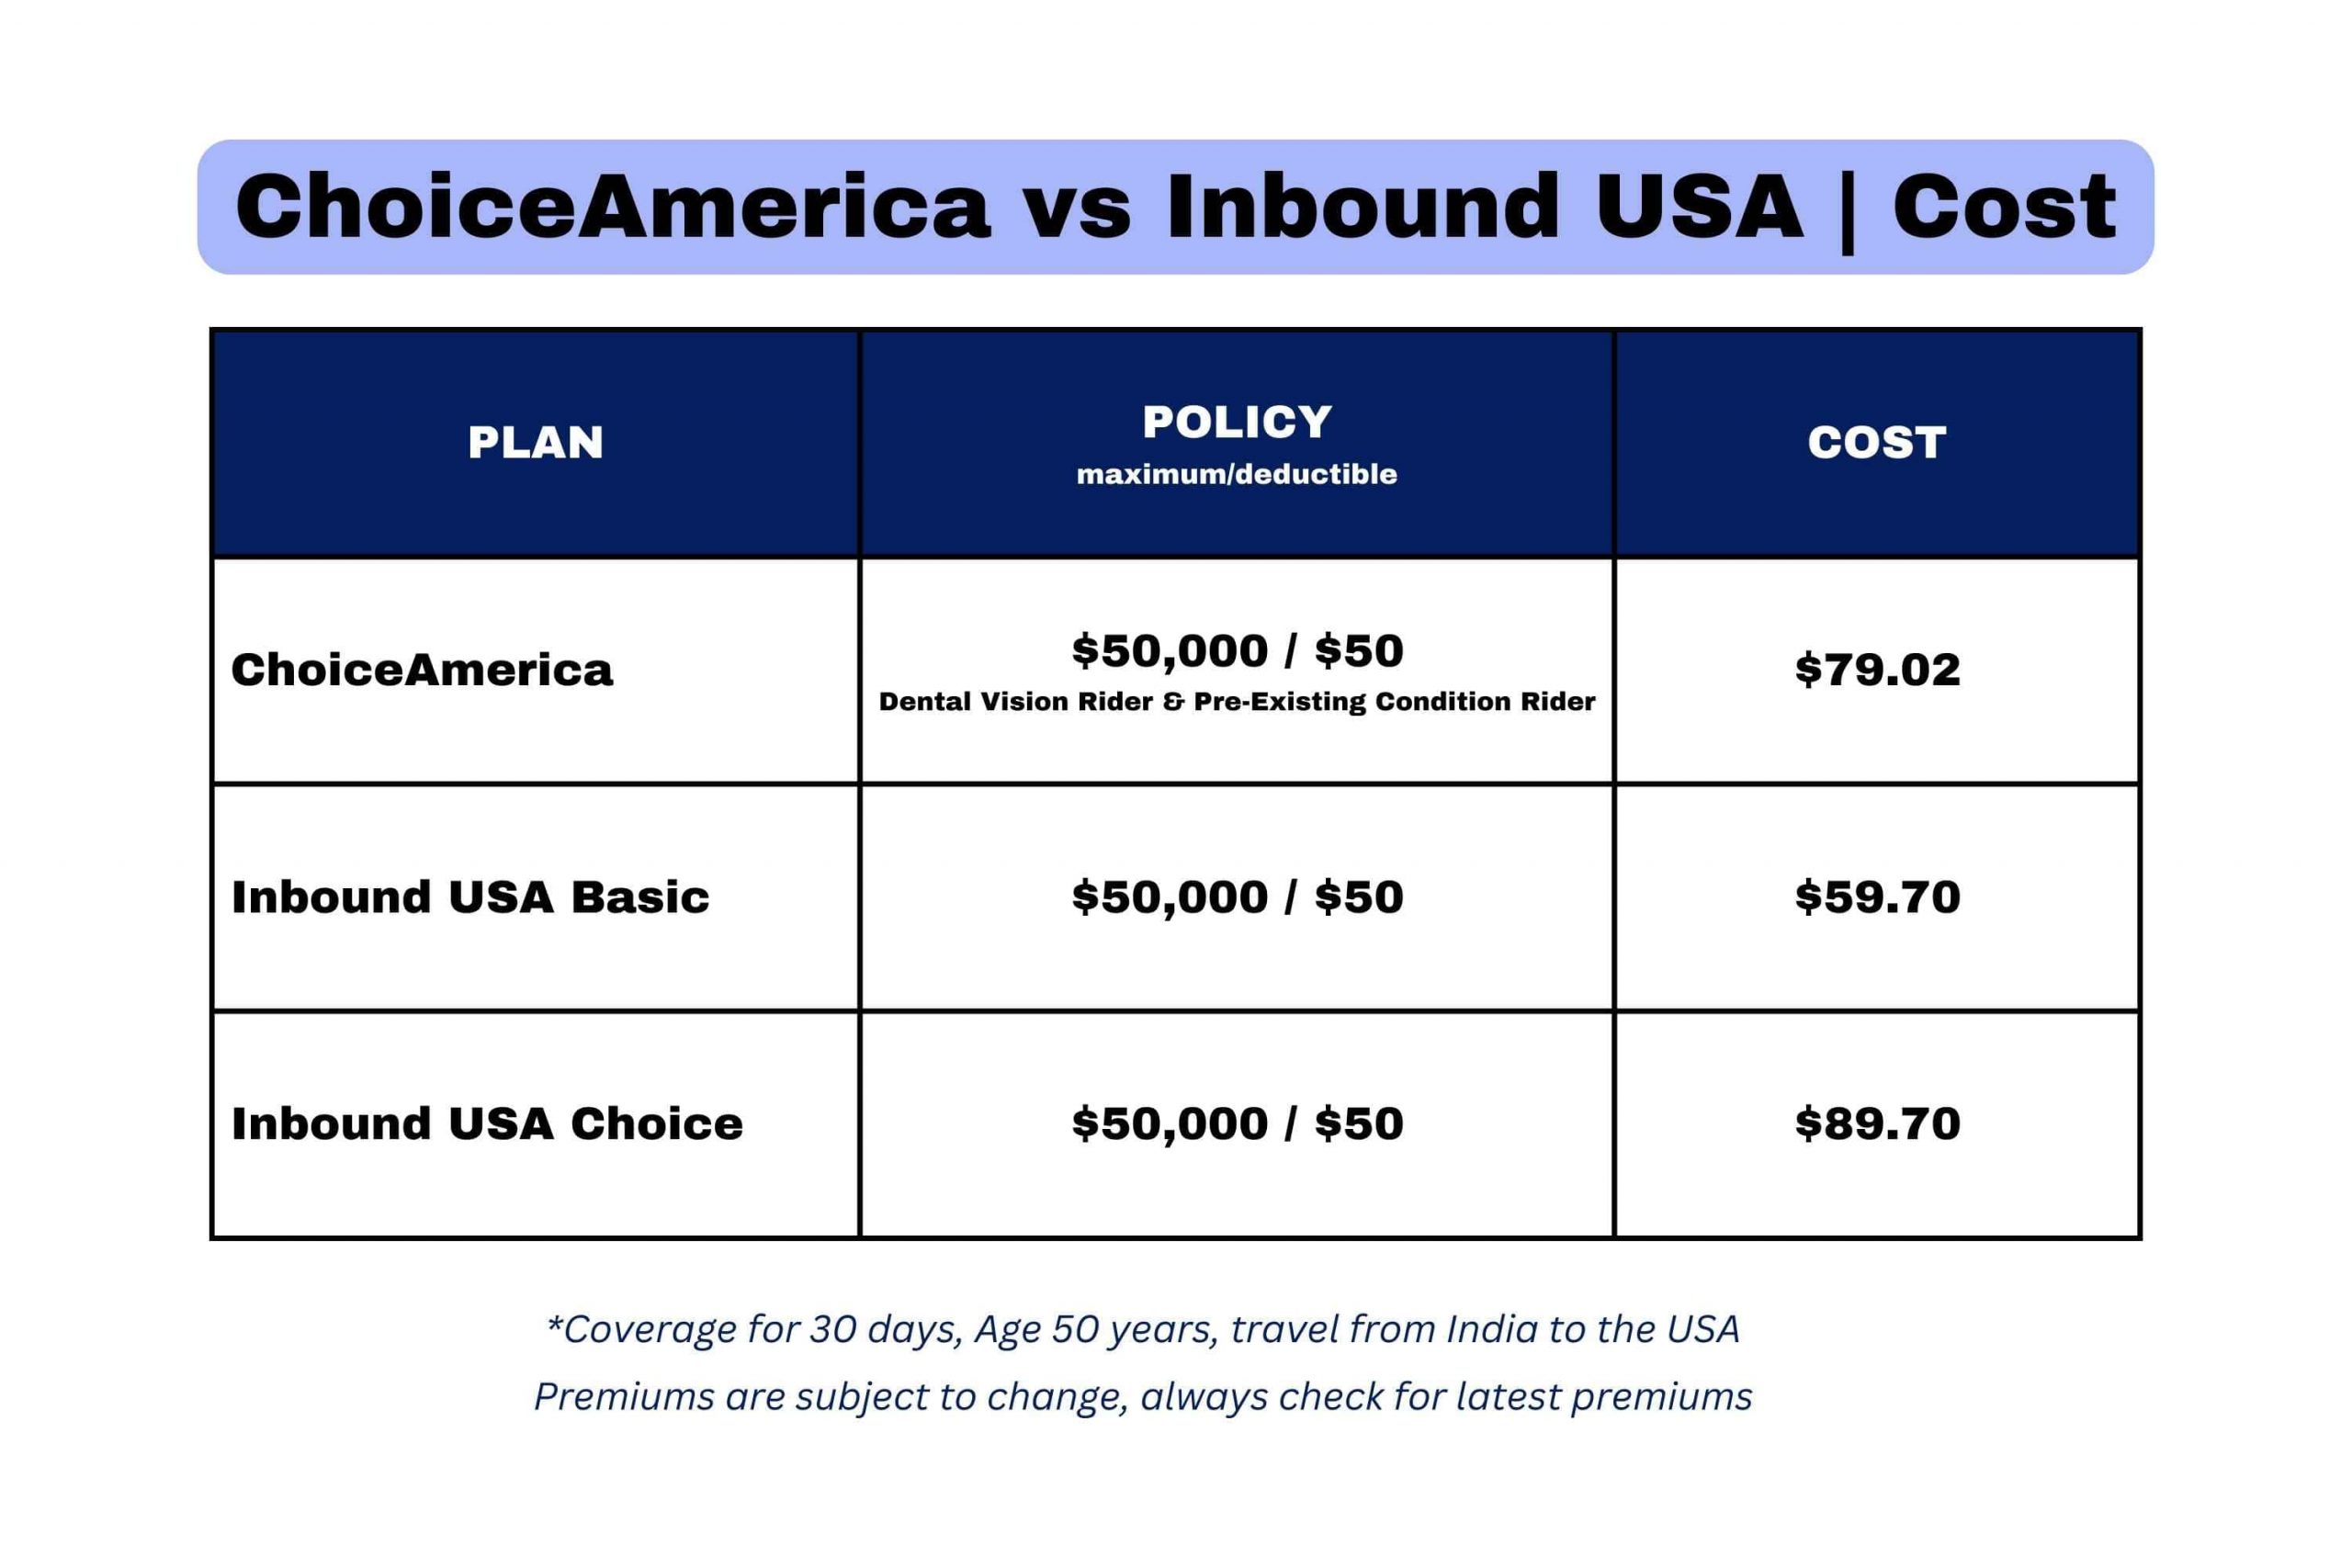 Cost of ChoiceAmerica vs Inbound USA Visitor Medical Insurance